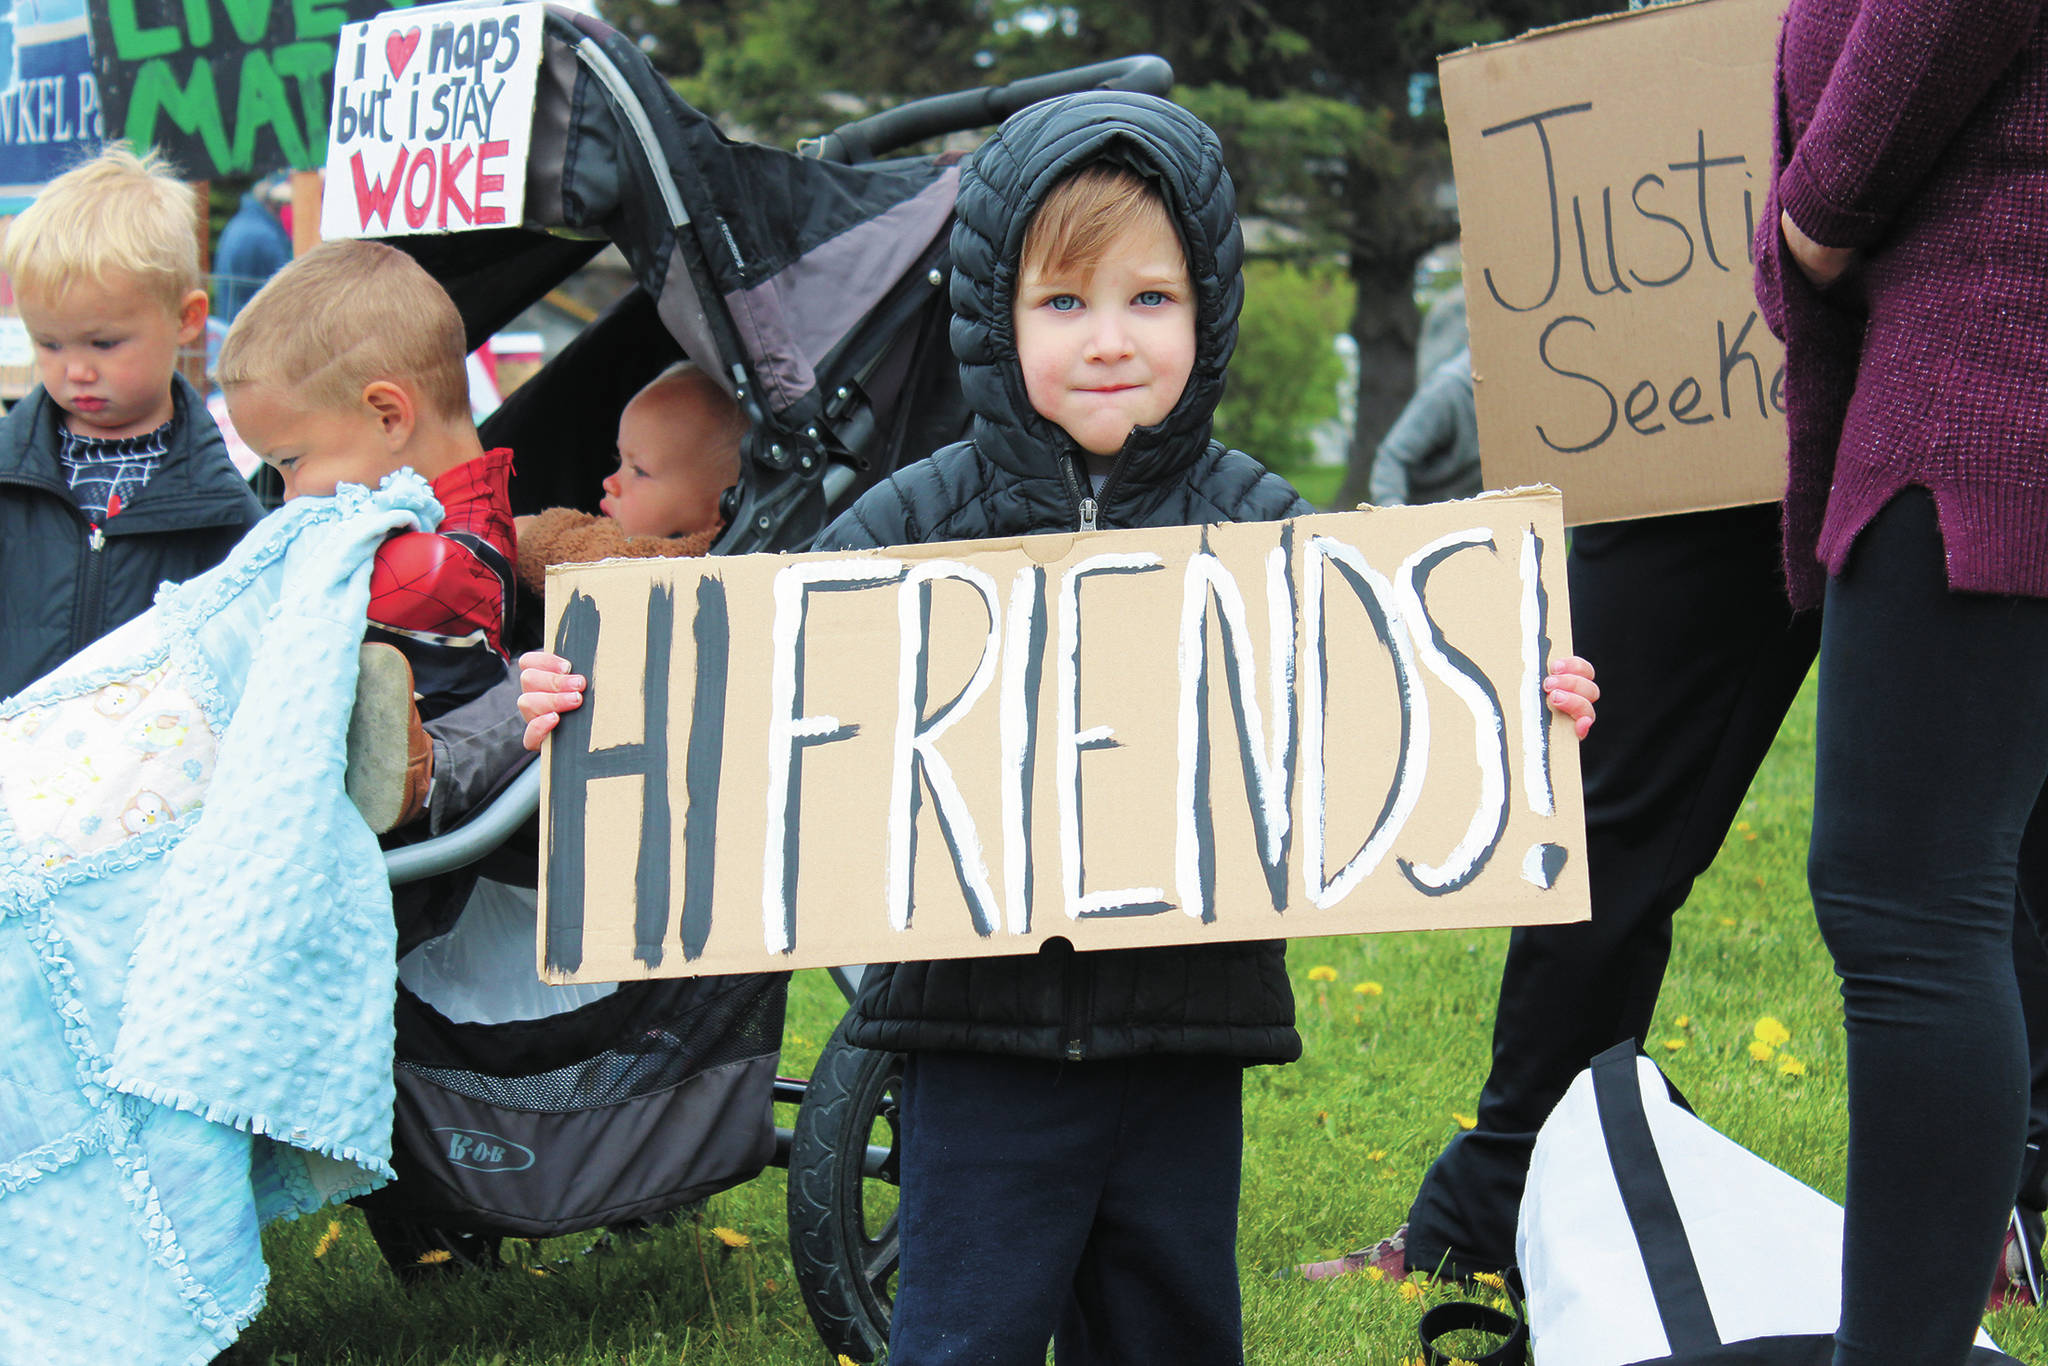 Remmik Toews, 2, holds up a sign that says “Hi friends!” during a Black Lives Matter demonstration on Tuesday, May 2, 2020 at WKFL Park in Homer, Alaska. (Photo by Megan Pacer/Homer News)